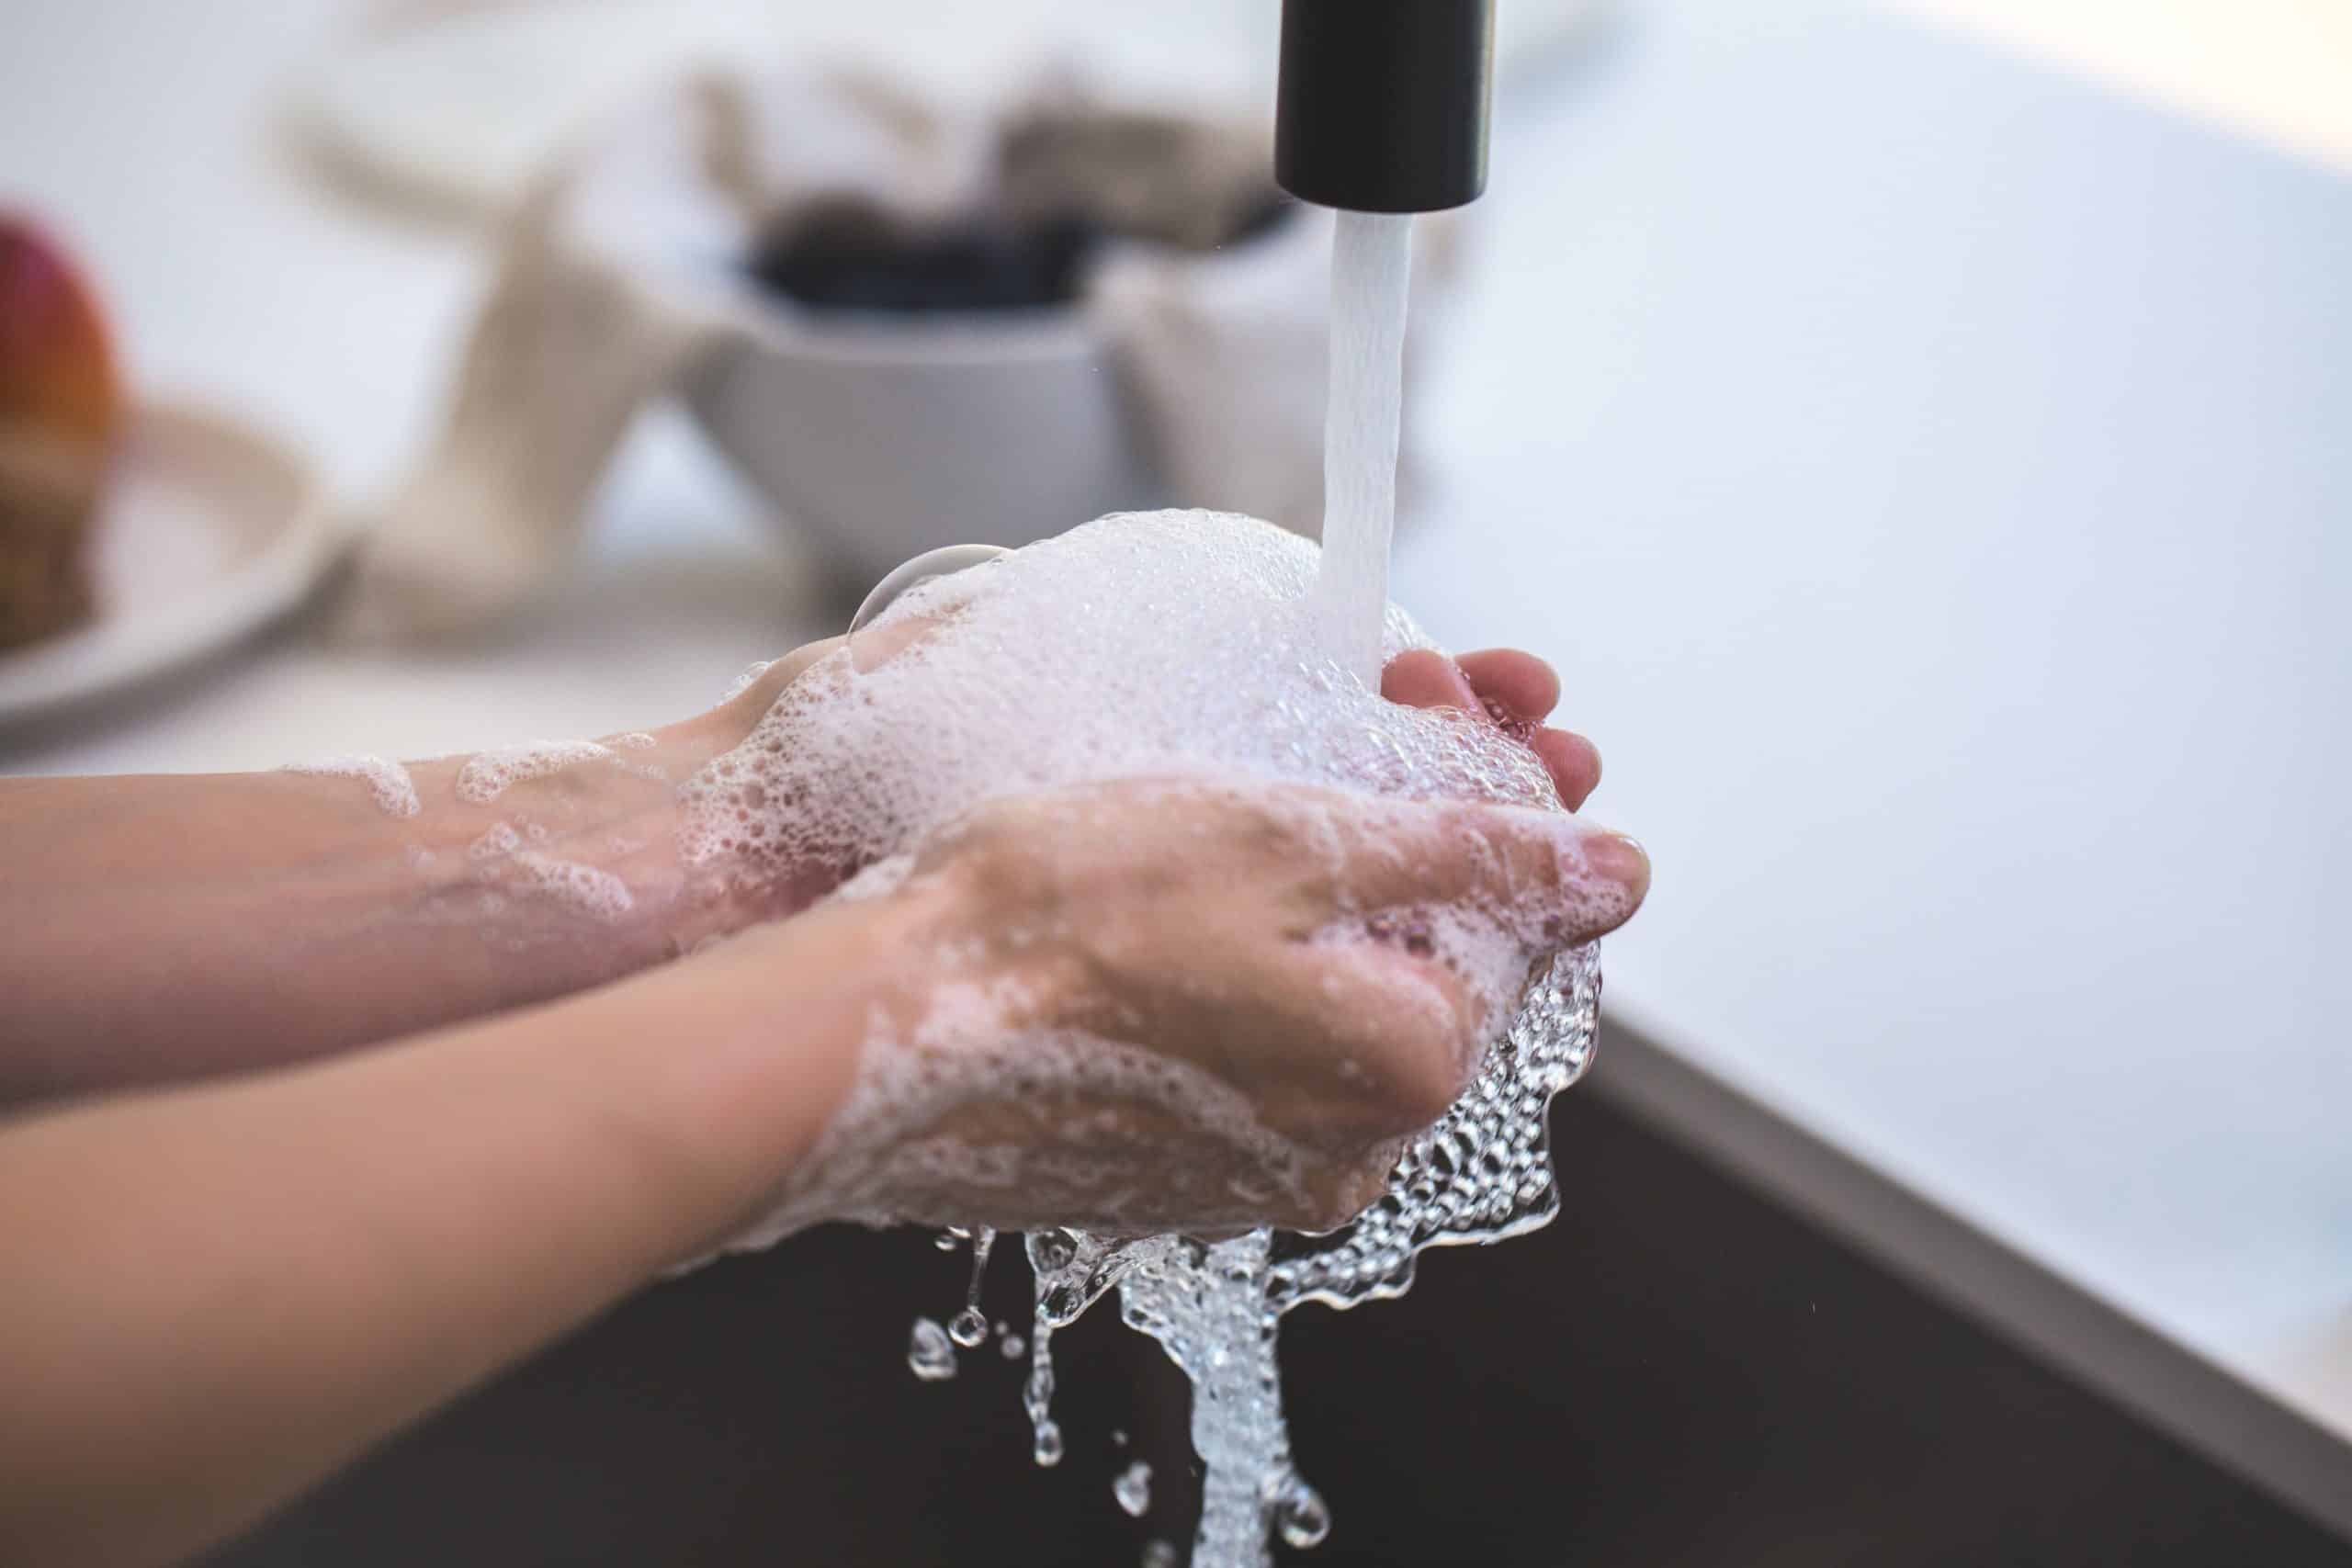 Handwashing: Are They Really That Dirty?